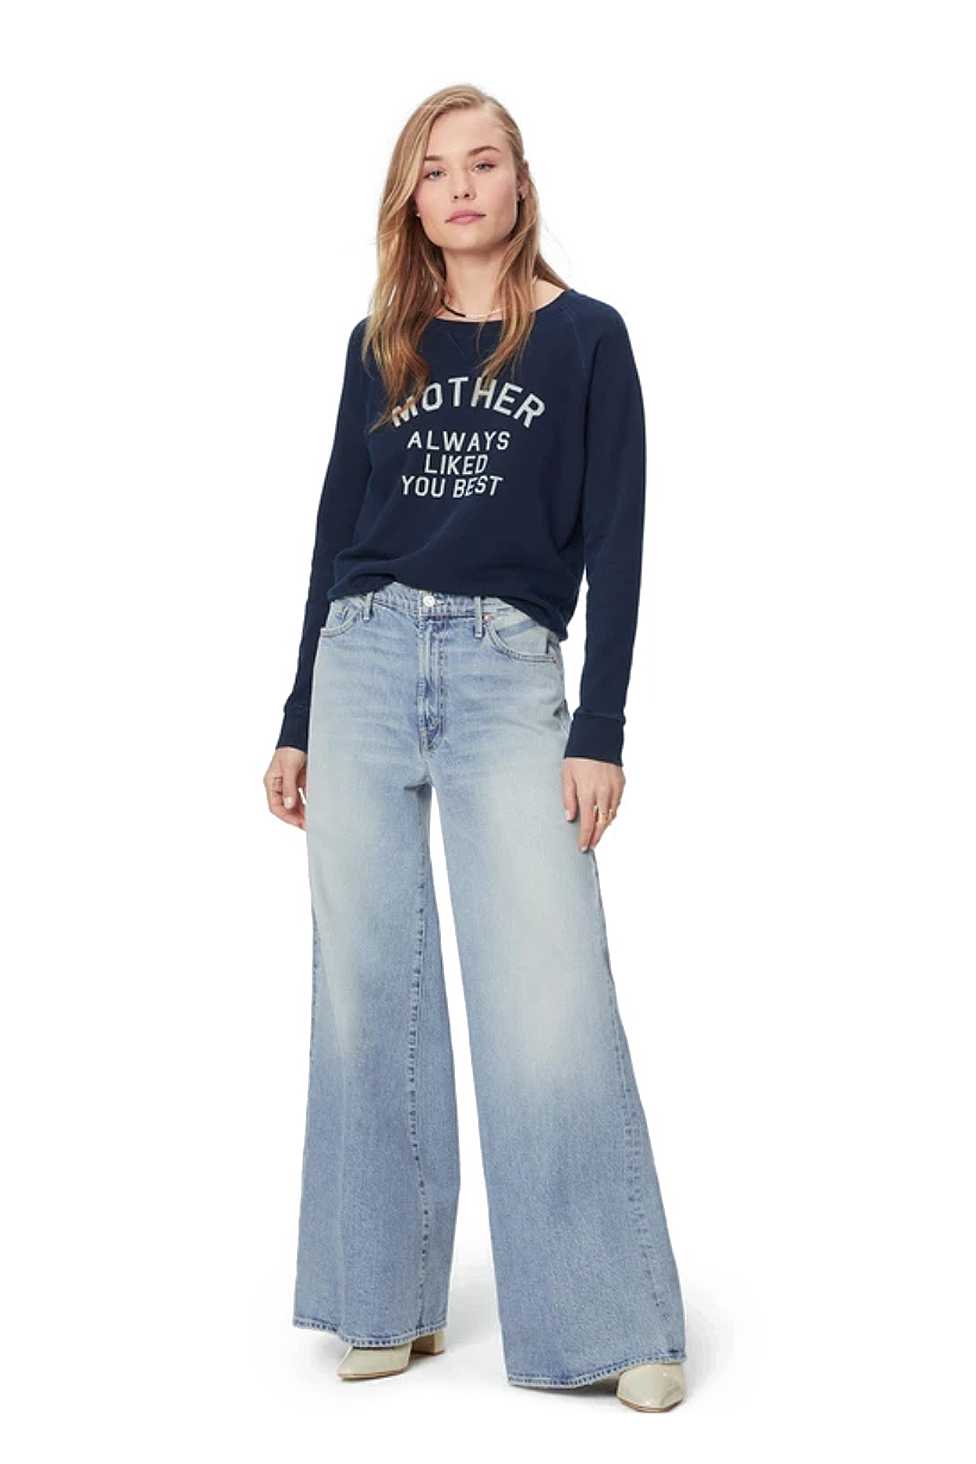 new jeans trend 2019